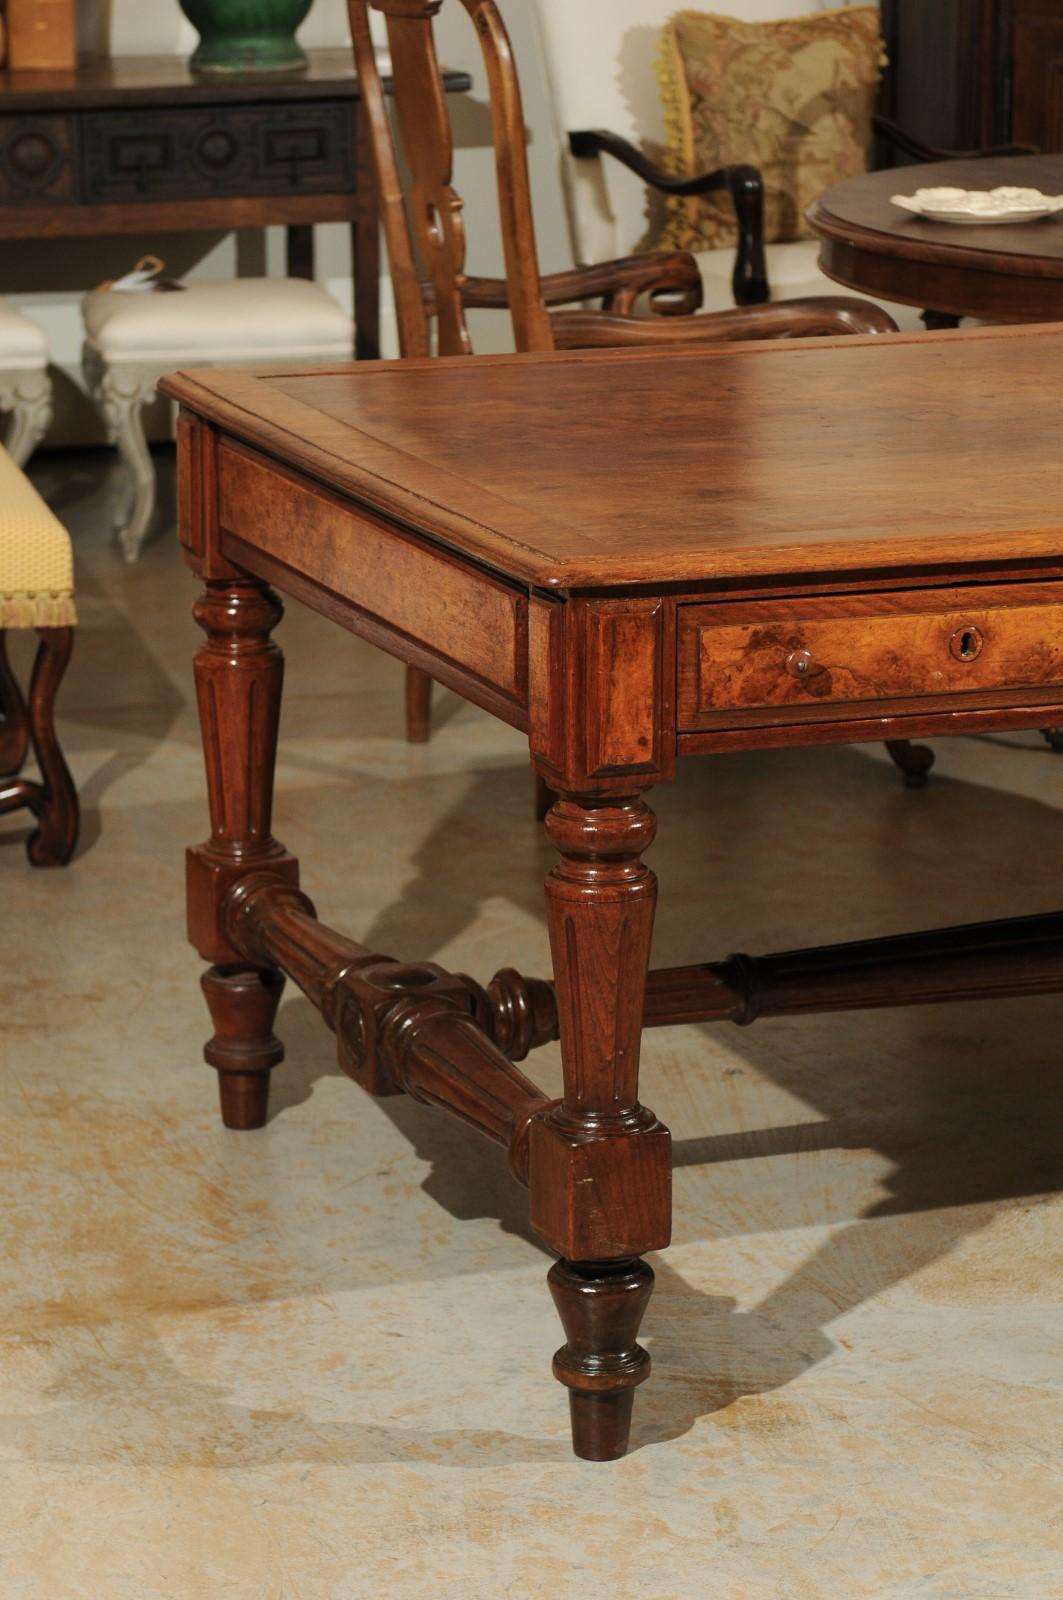 19th Century American Walnut Partners Desk with Six Drawers and Turned Legs 6